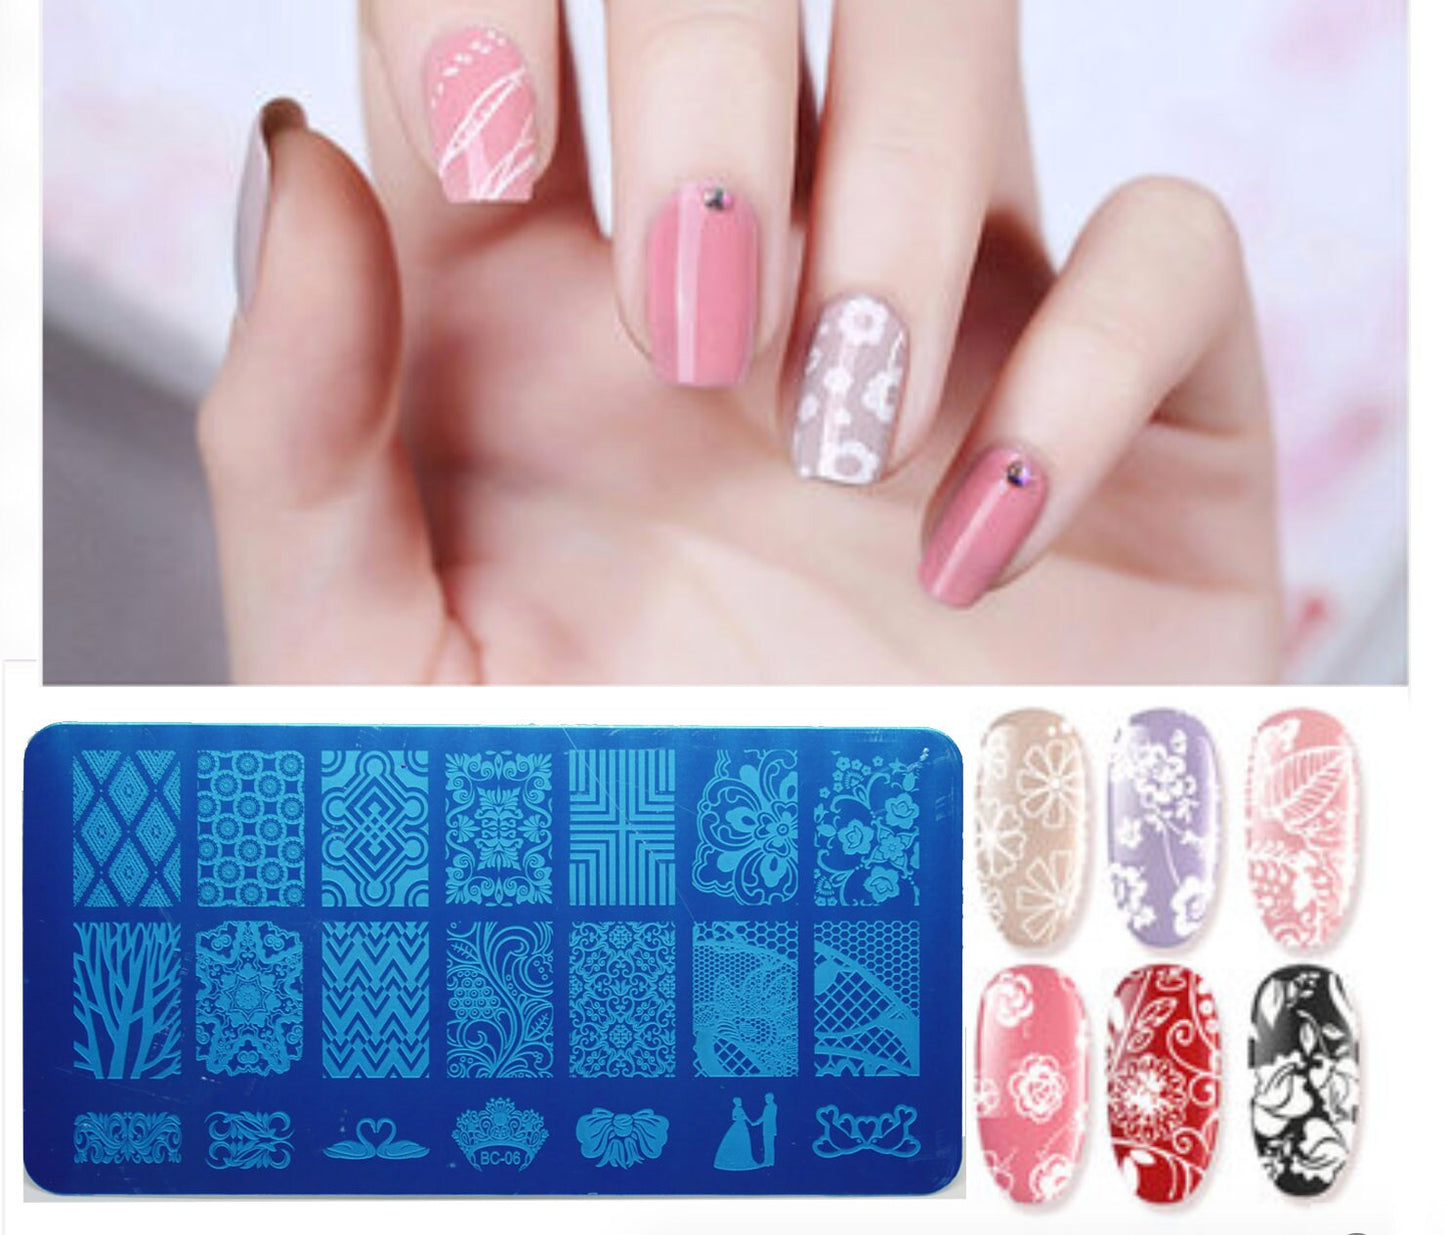 Garden floral Nail Art Stamping Image Plates/ flower fairy tale nail stamp Plates Manicure Nail Designs DIY